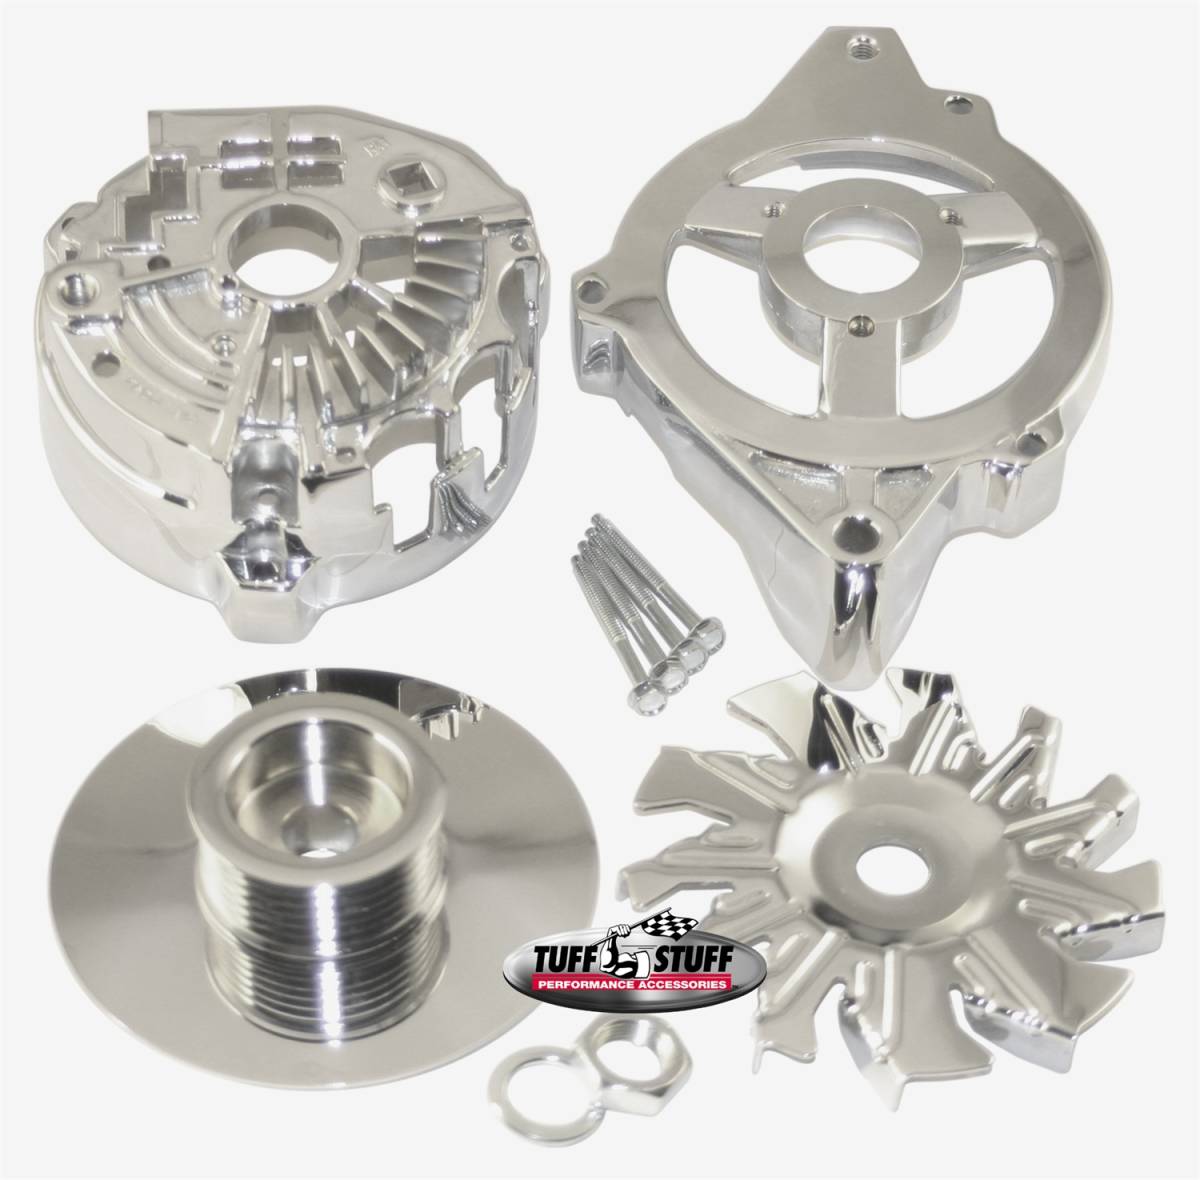 Tuff Stuff Performance - Alternator Case Kit Fits GM CS130 w/6 Groove Pulley And Tuff Stuff Alternator PN[7935] Incl. Front And Rear Housings/Fan/Pulley/Nut/Lockwashers/Thru Bolts Chrome Plated 7500H